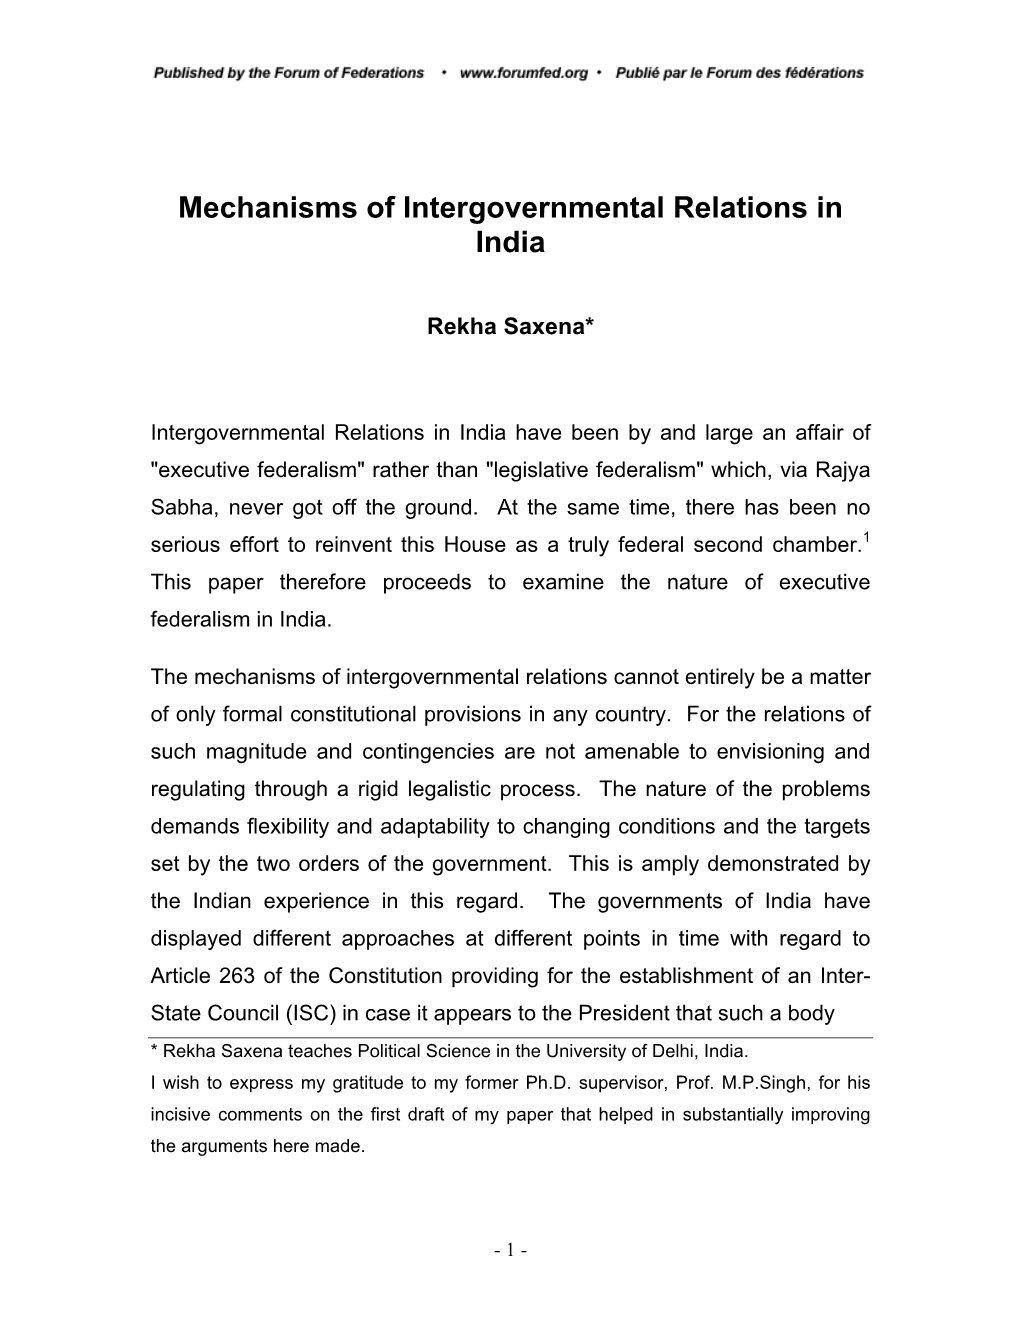 Mechanisms of Intergovernmental Relations in India